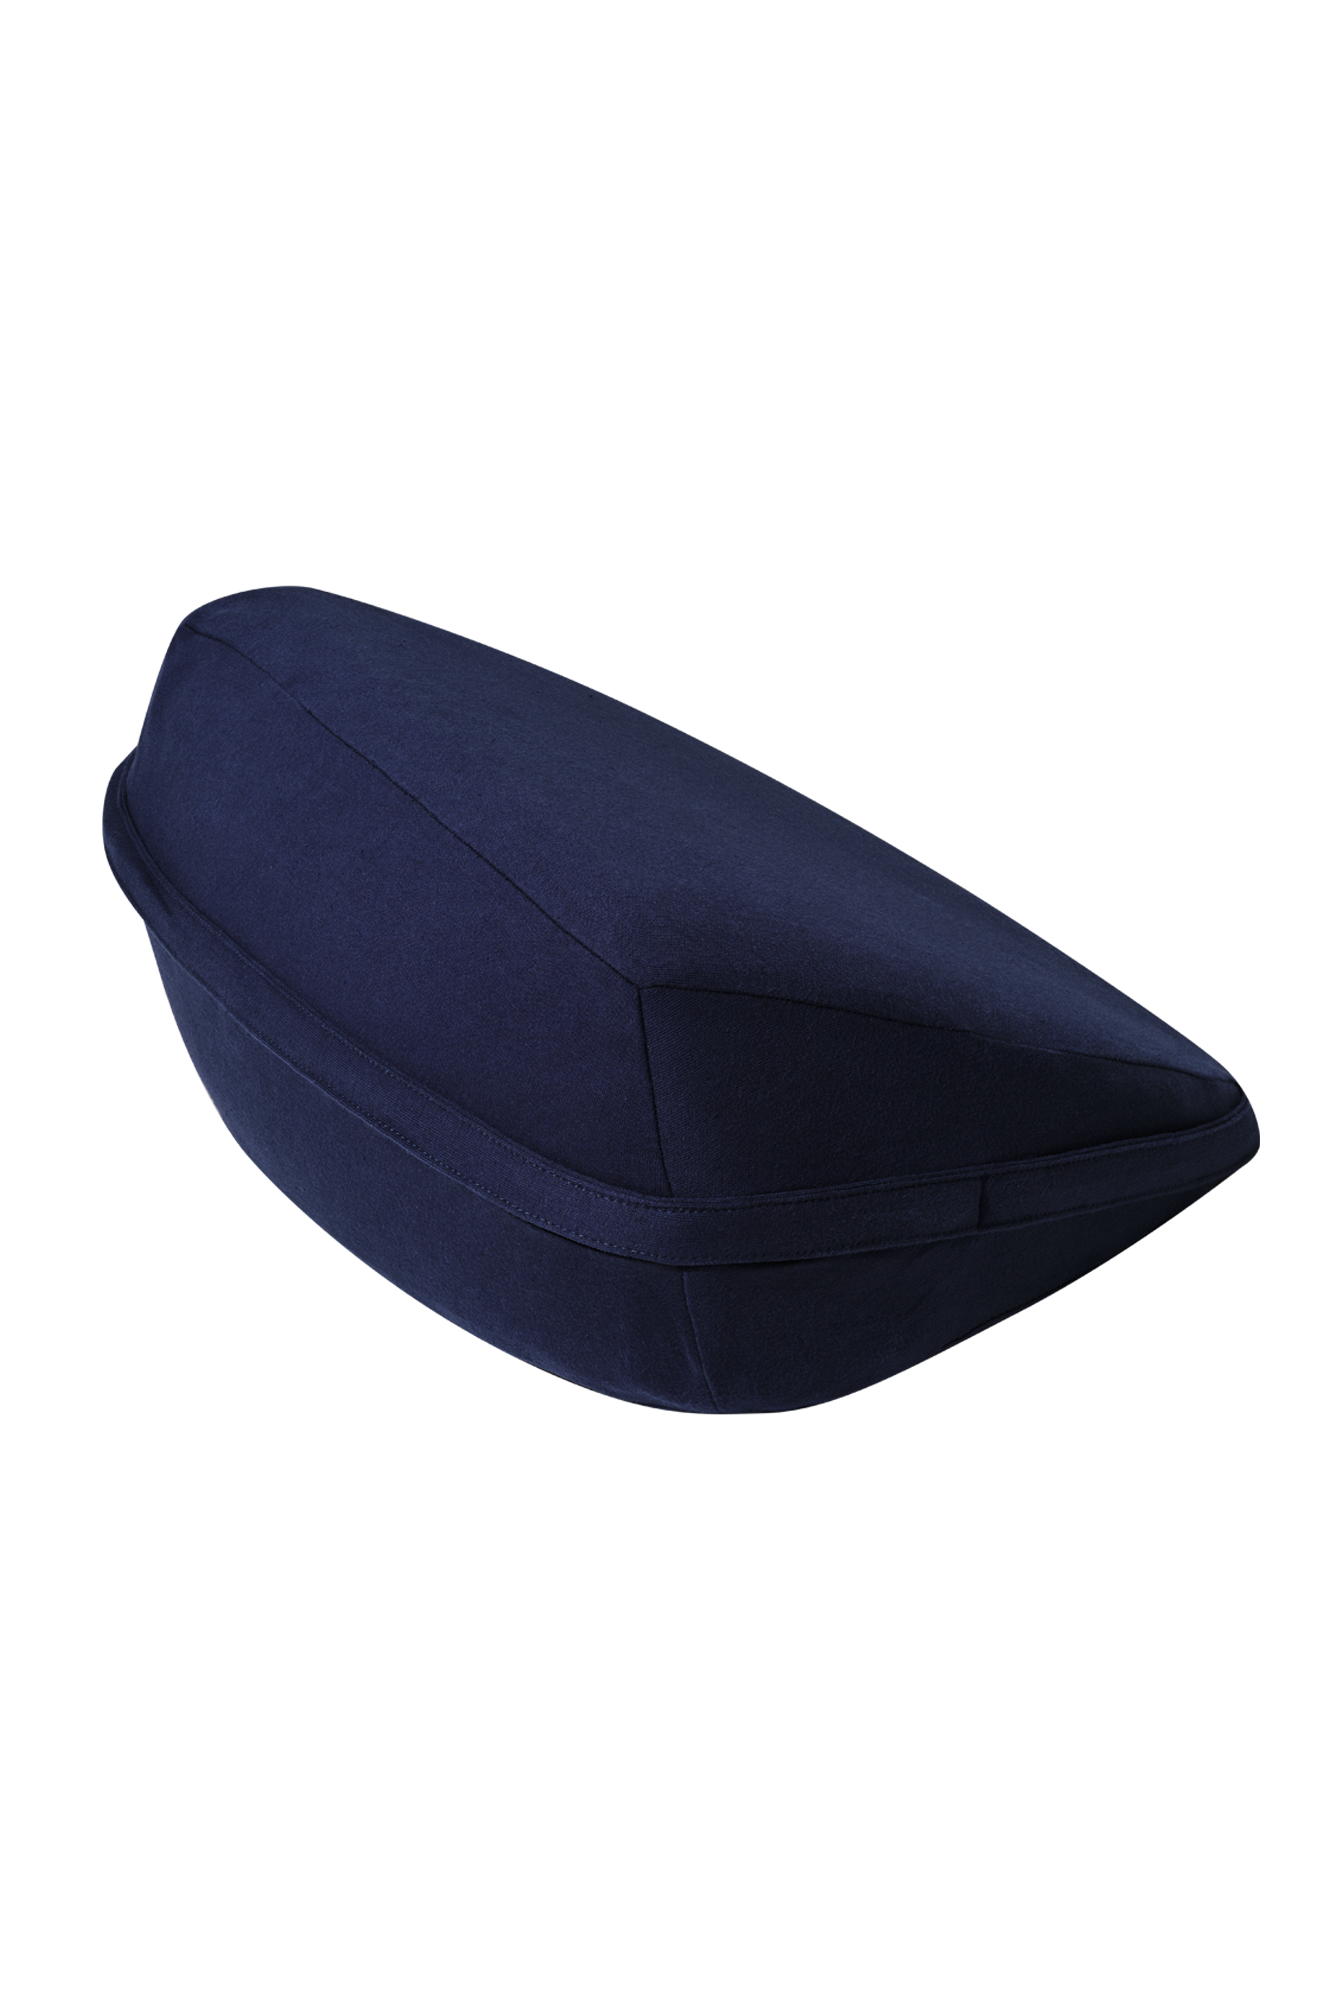 Indigo | An indigo-blue pillow, roughly square pyramid shaped, seen from the back, on off-white background.